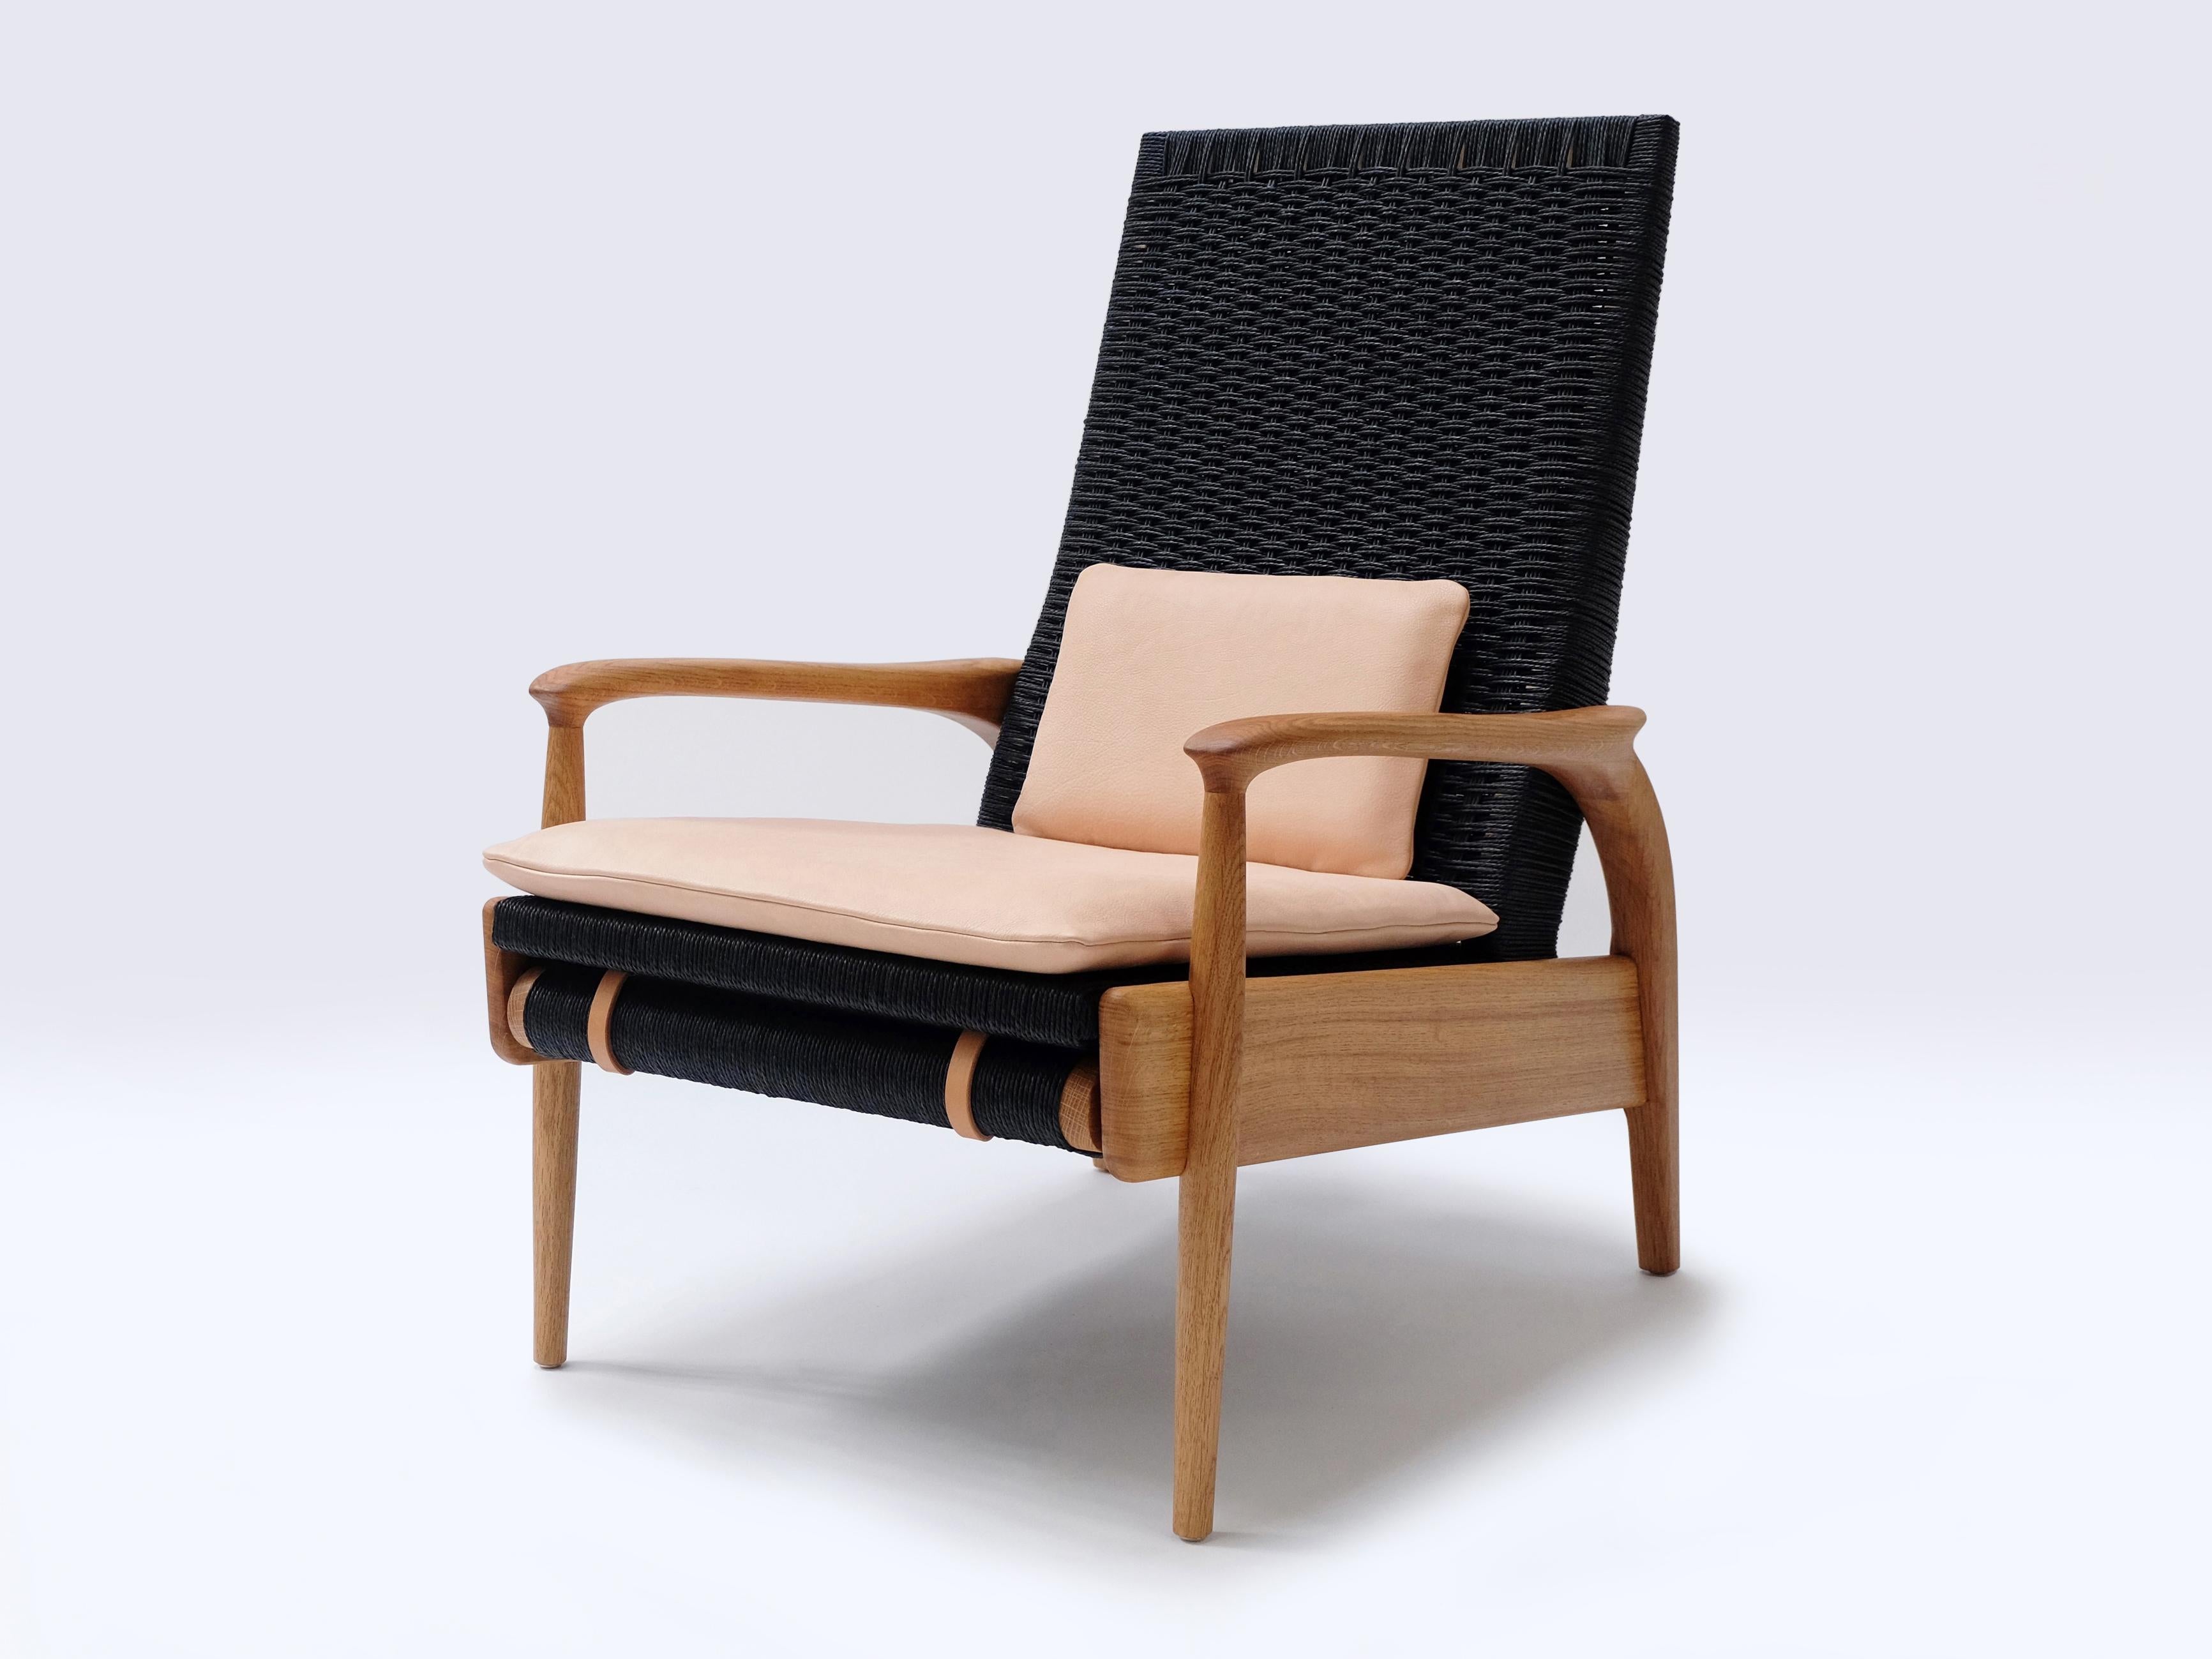 Custom-Made Handcrafted Reclining Lounge Chair in Oiled Oak& Black Danish Cord For Sale 4